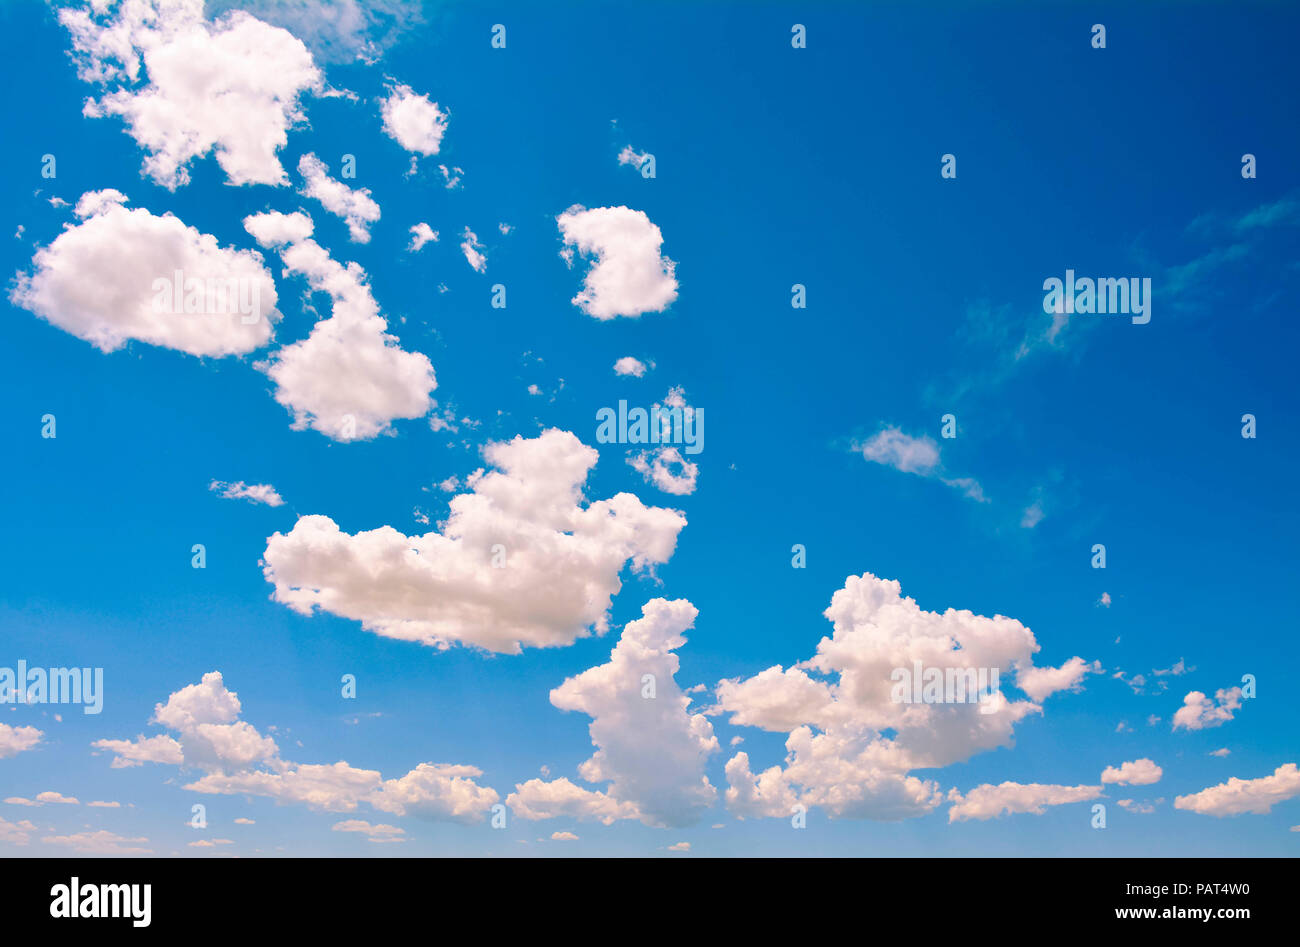 a View the sky's horizon full of distant white fluffy clouds against gradated blue sky Stock Photo